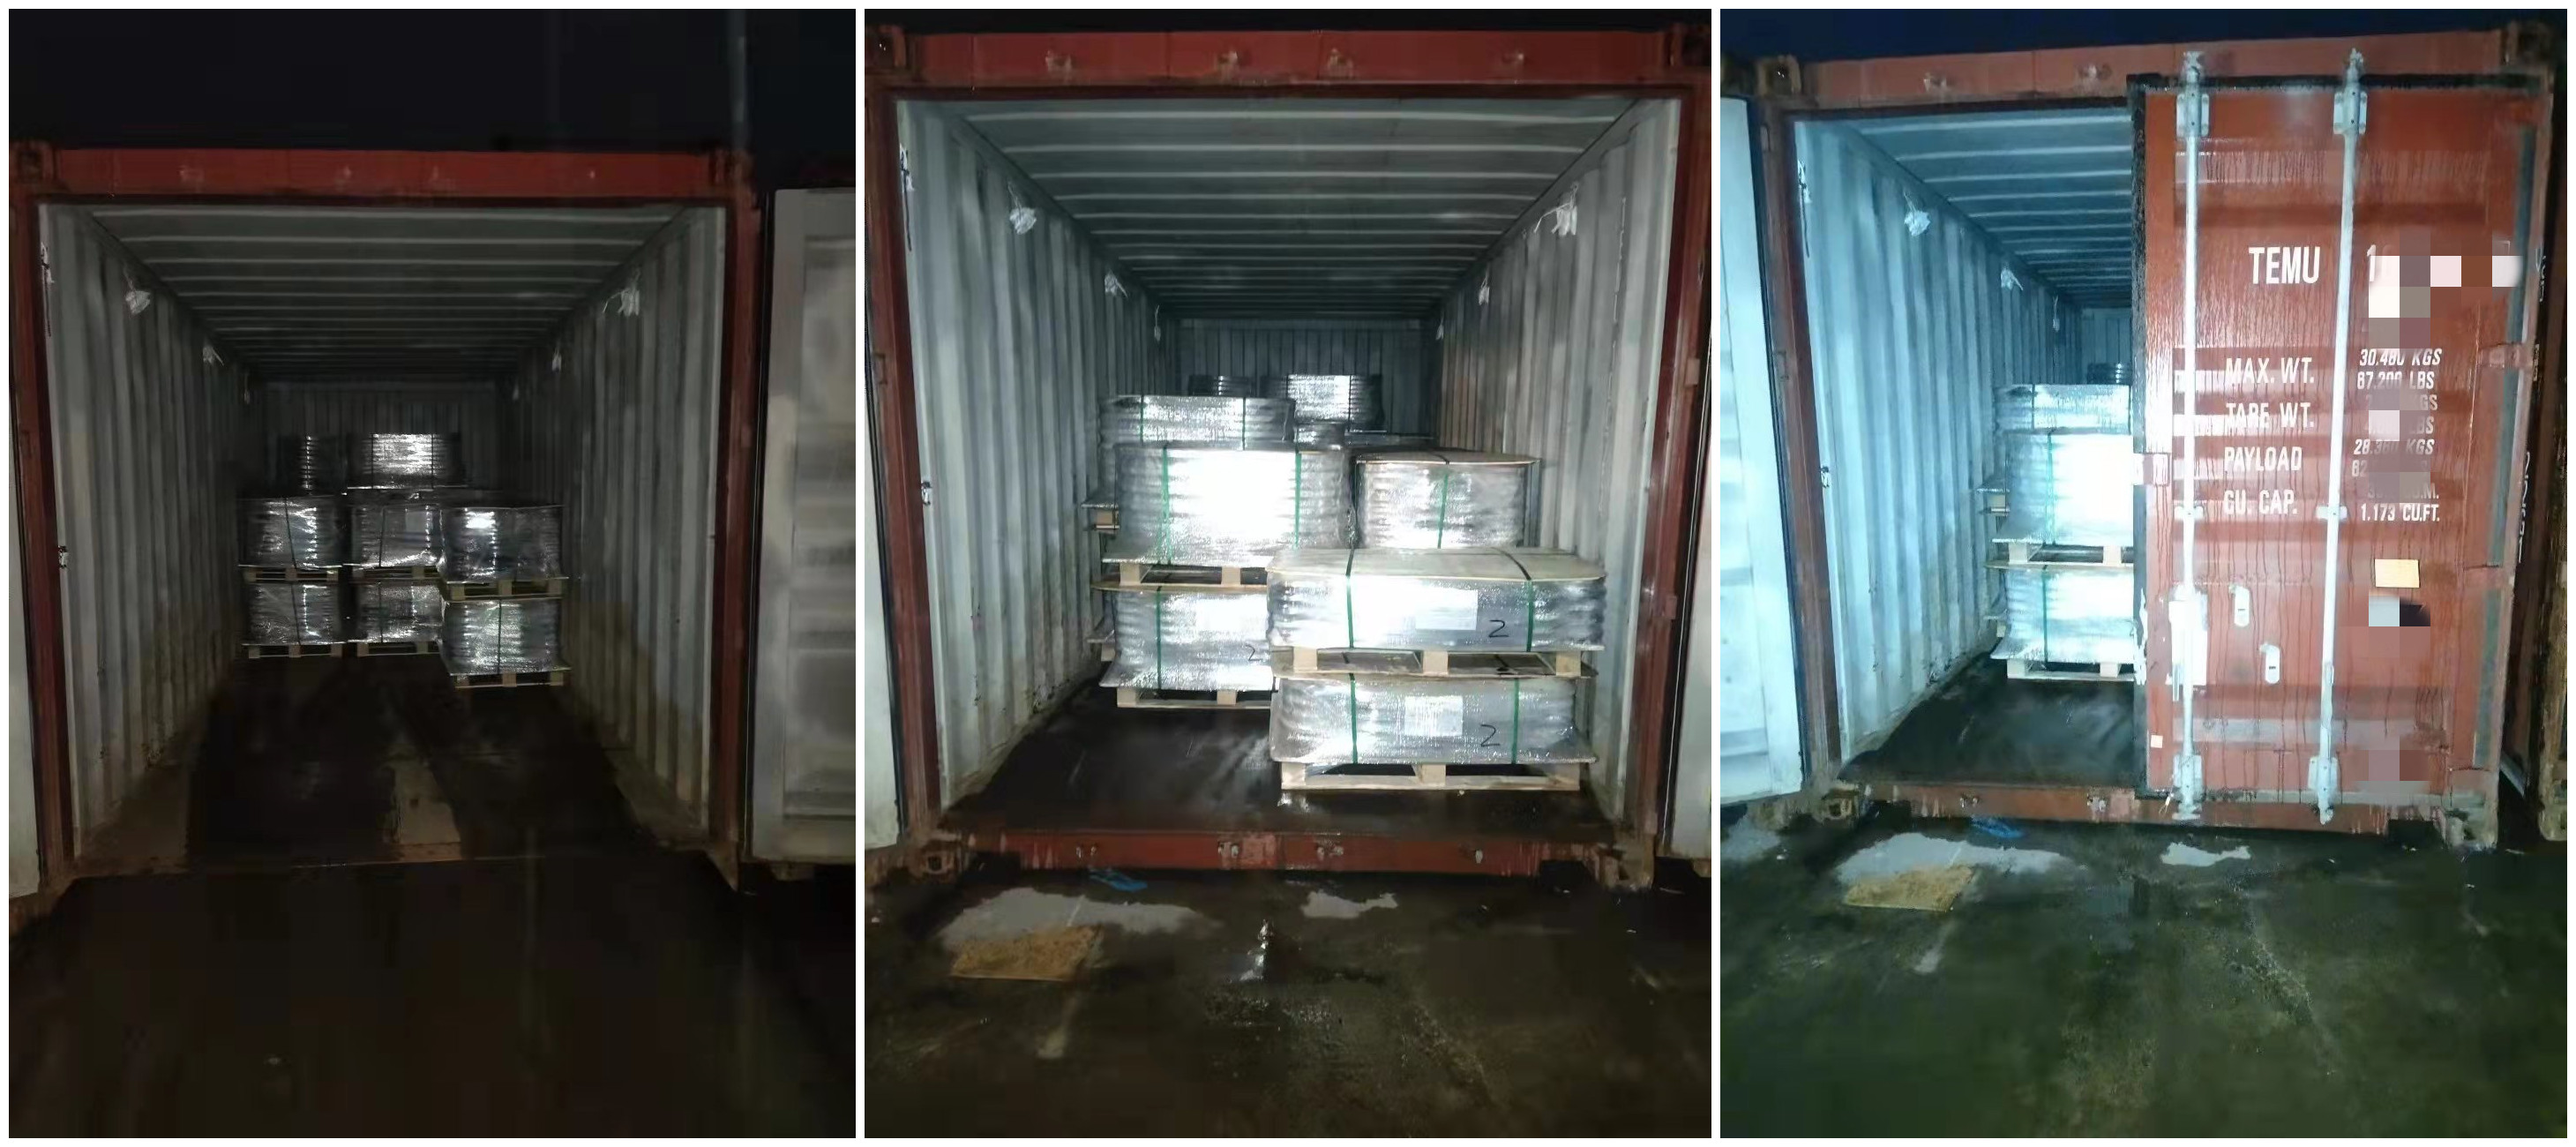 3 containers shipped to the port of Felixstowe, UK today! 